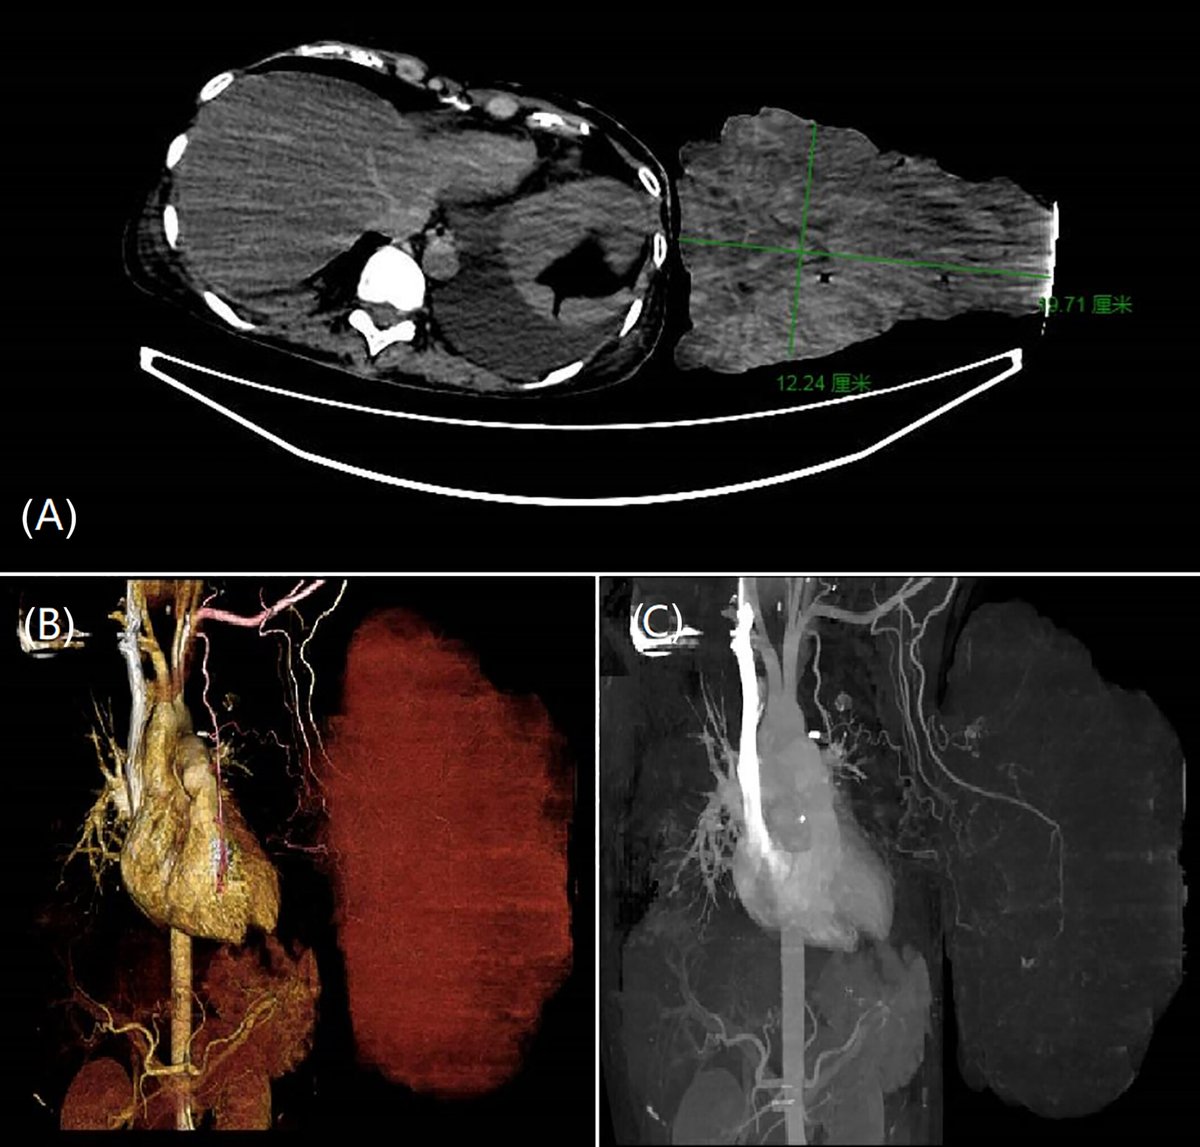 Wang et al. published #CaseStudy of benign #PhyllodesTumor (PT) measuring 30 × 20 × 15 cm3 with #malignant features. Atypical PT accompanied with silent venous thromboembolism. Patient surgically treated, along with anticoagulation therapy.
doi.org/10.1002/cnr2.1…
#CancerReports